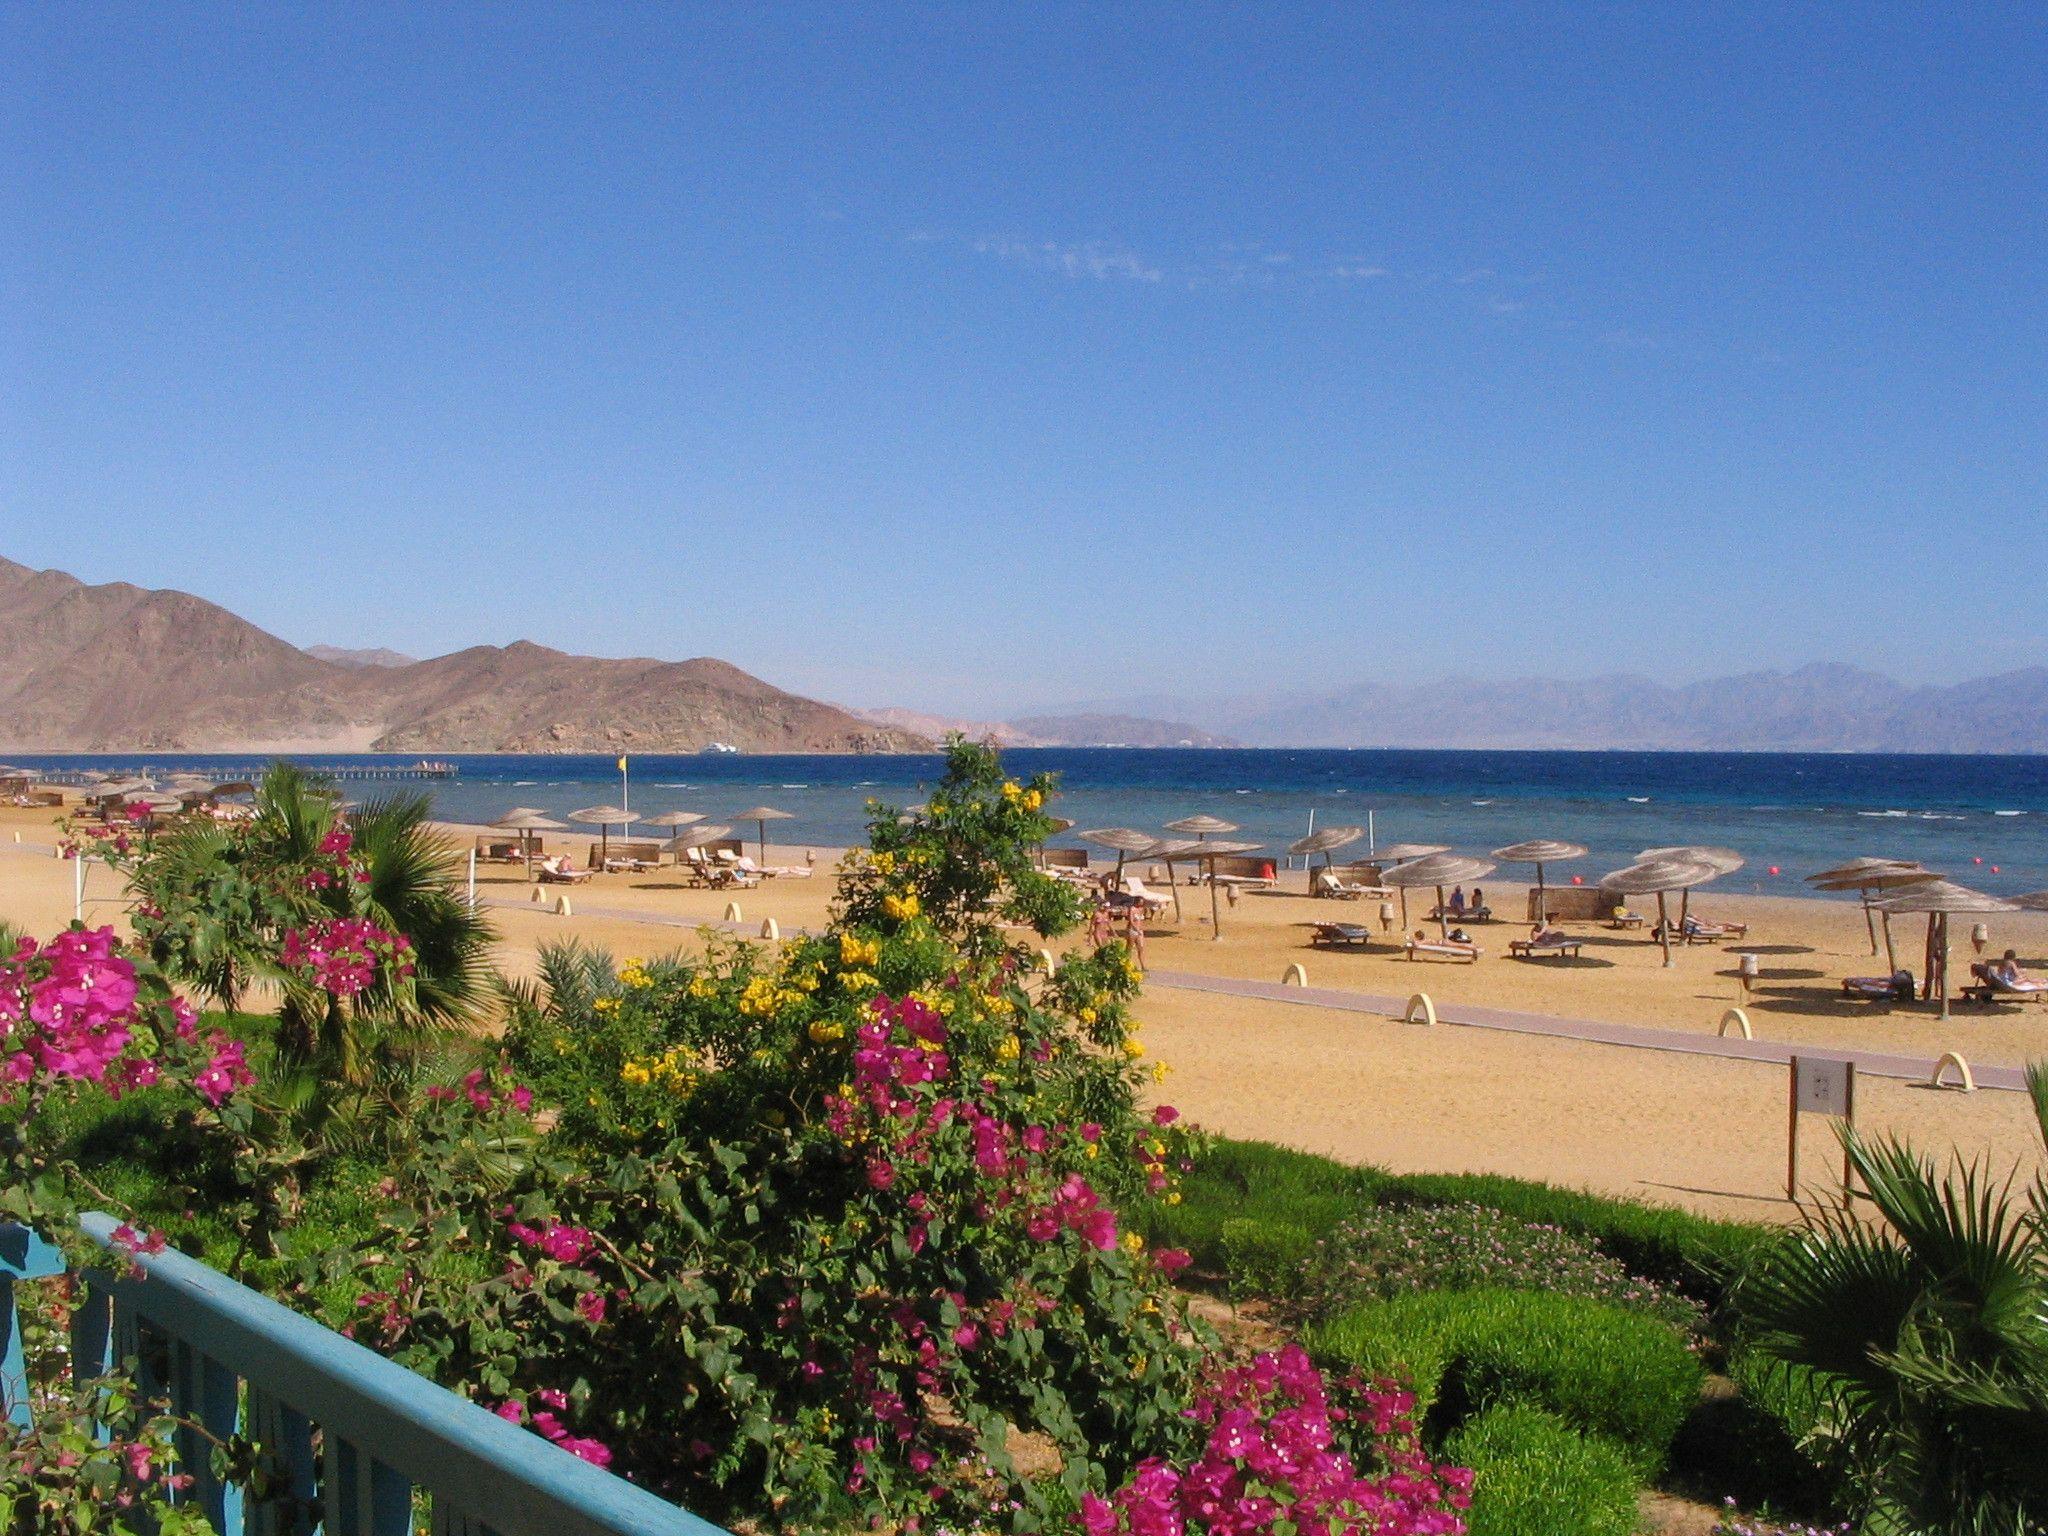 Flowers on the beach in the resort of Taba, Egypt wallpaper